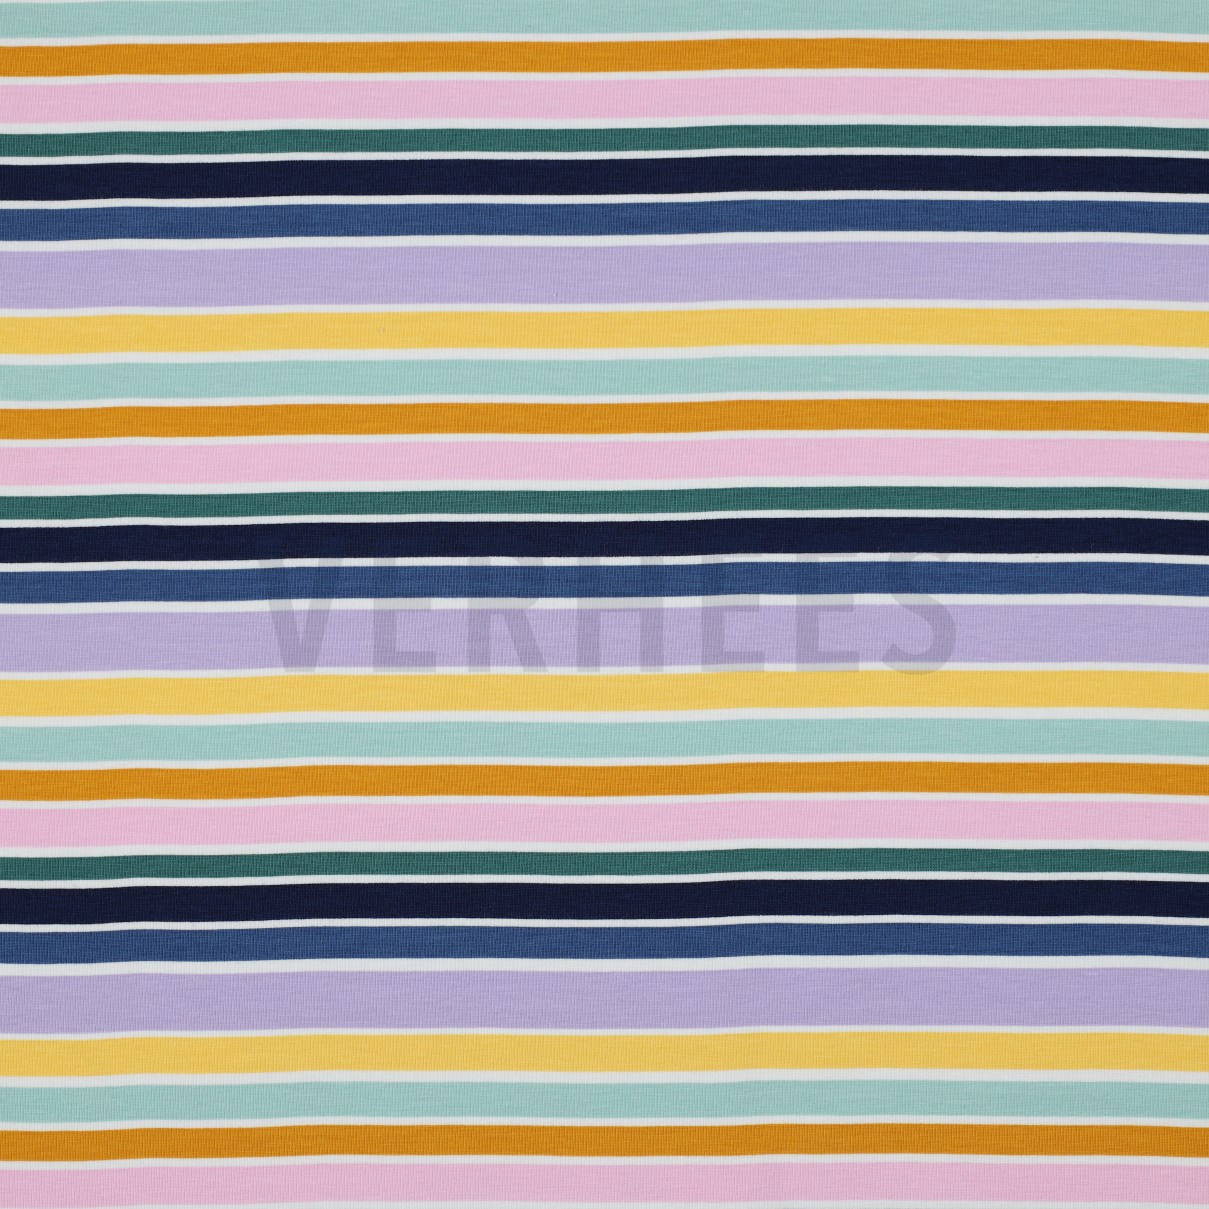 JERSEY PATCHES AND STRIPES MULTI COLOUR (high resolution)